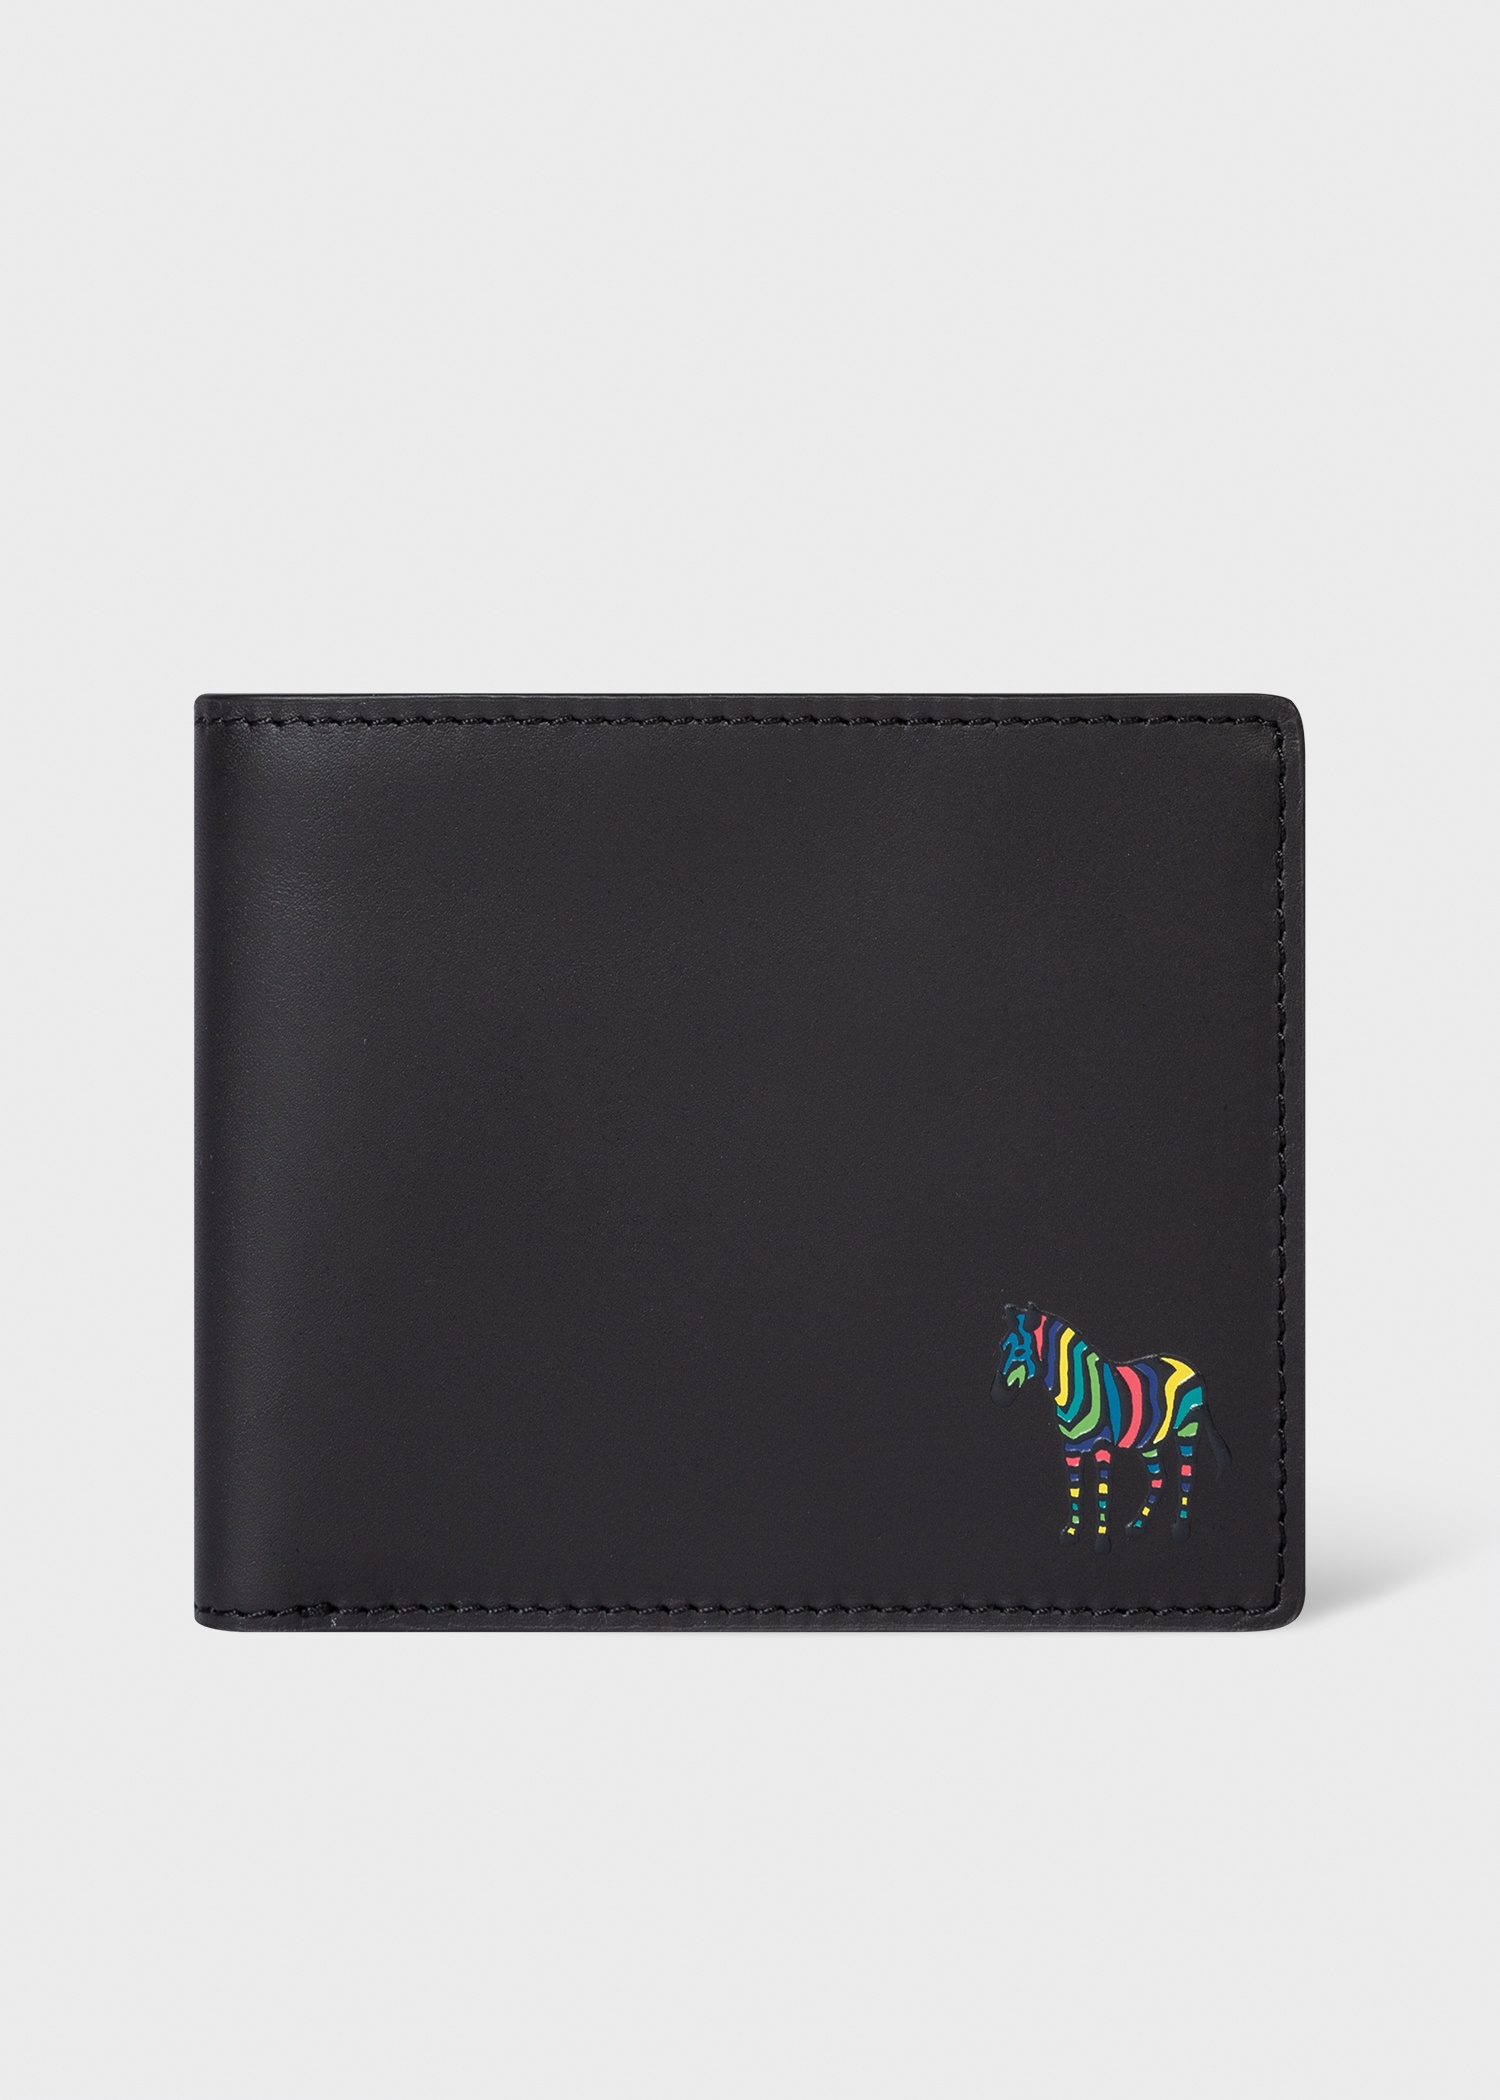 Black 'Zebra' Leather Billfold And Coin Wallet - 1